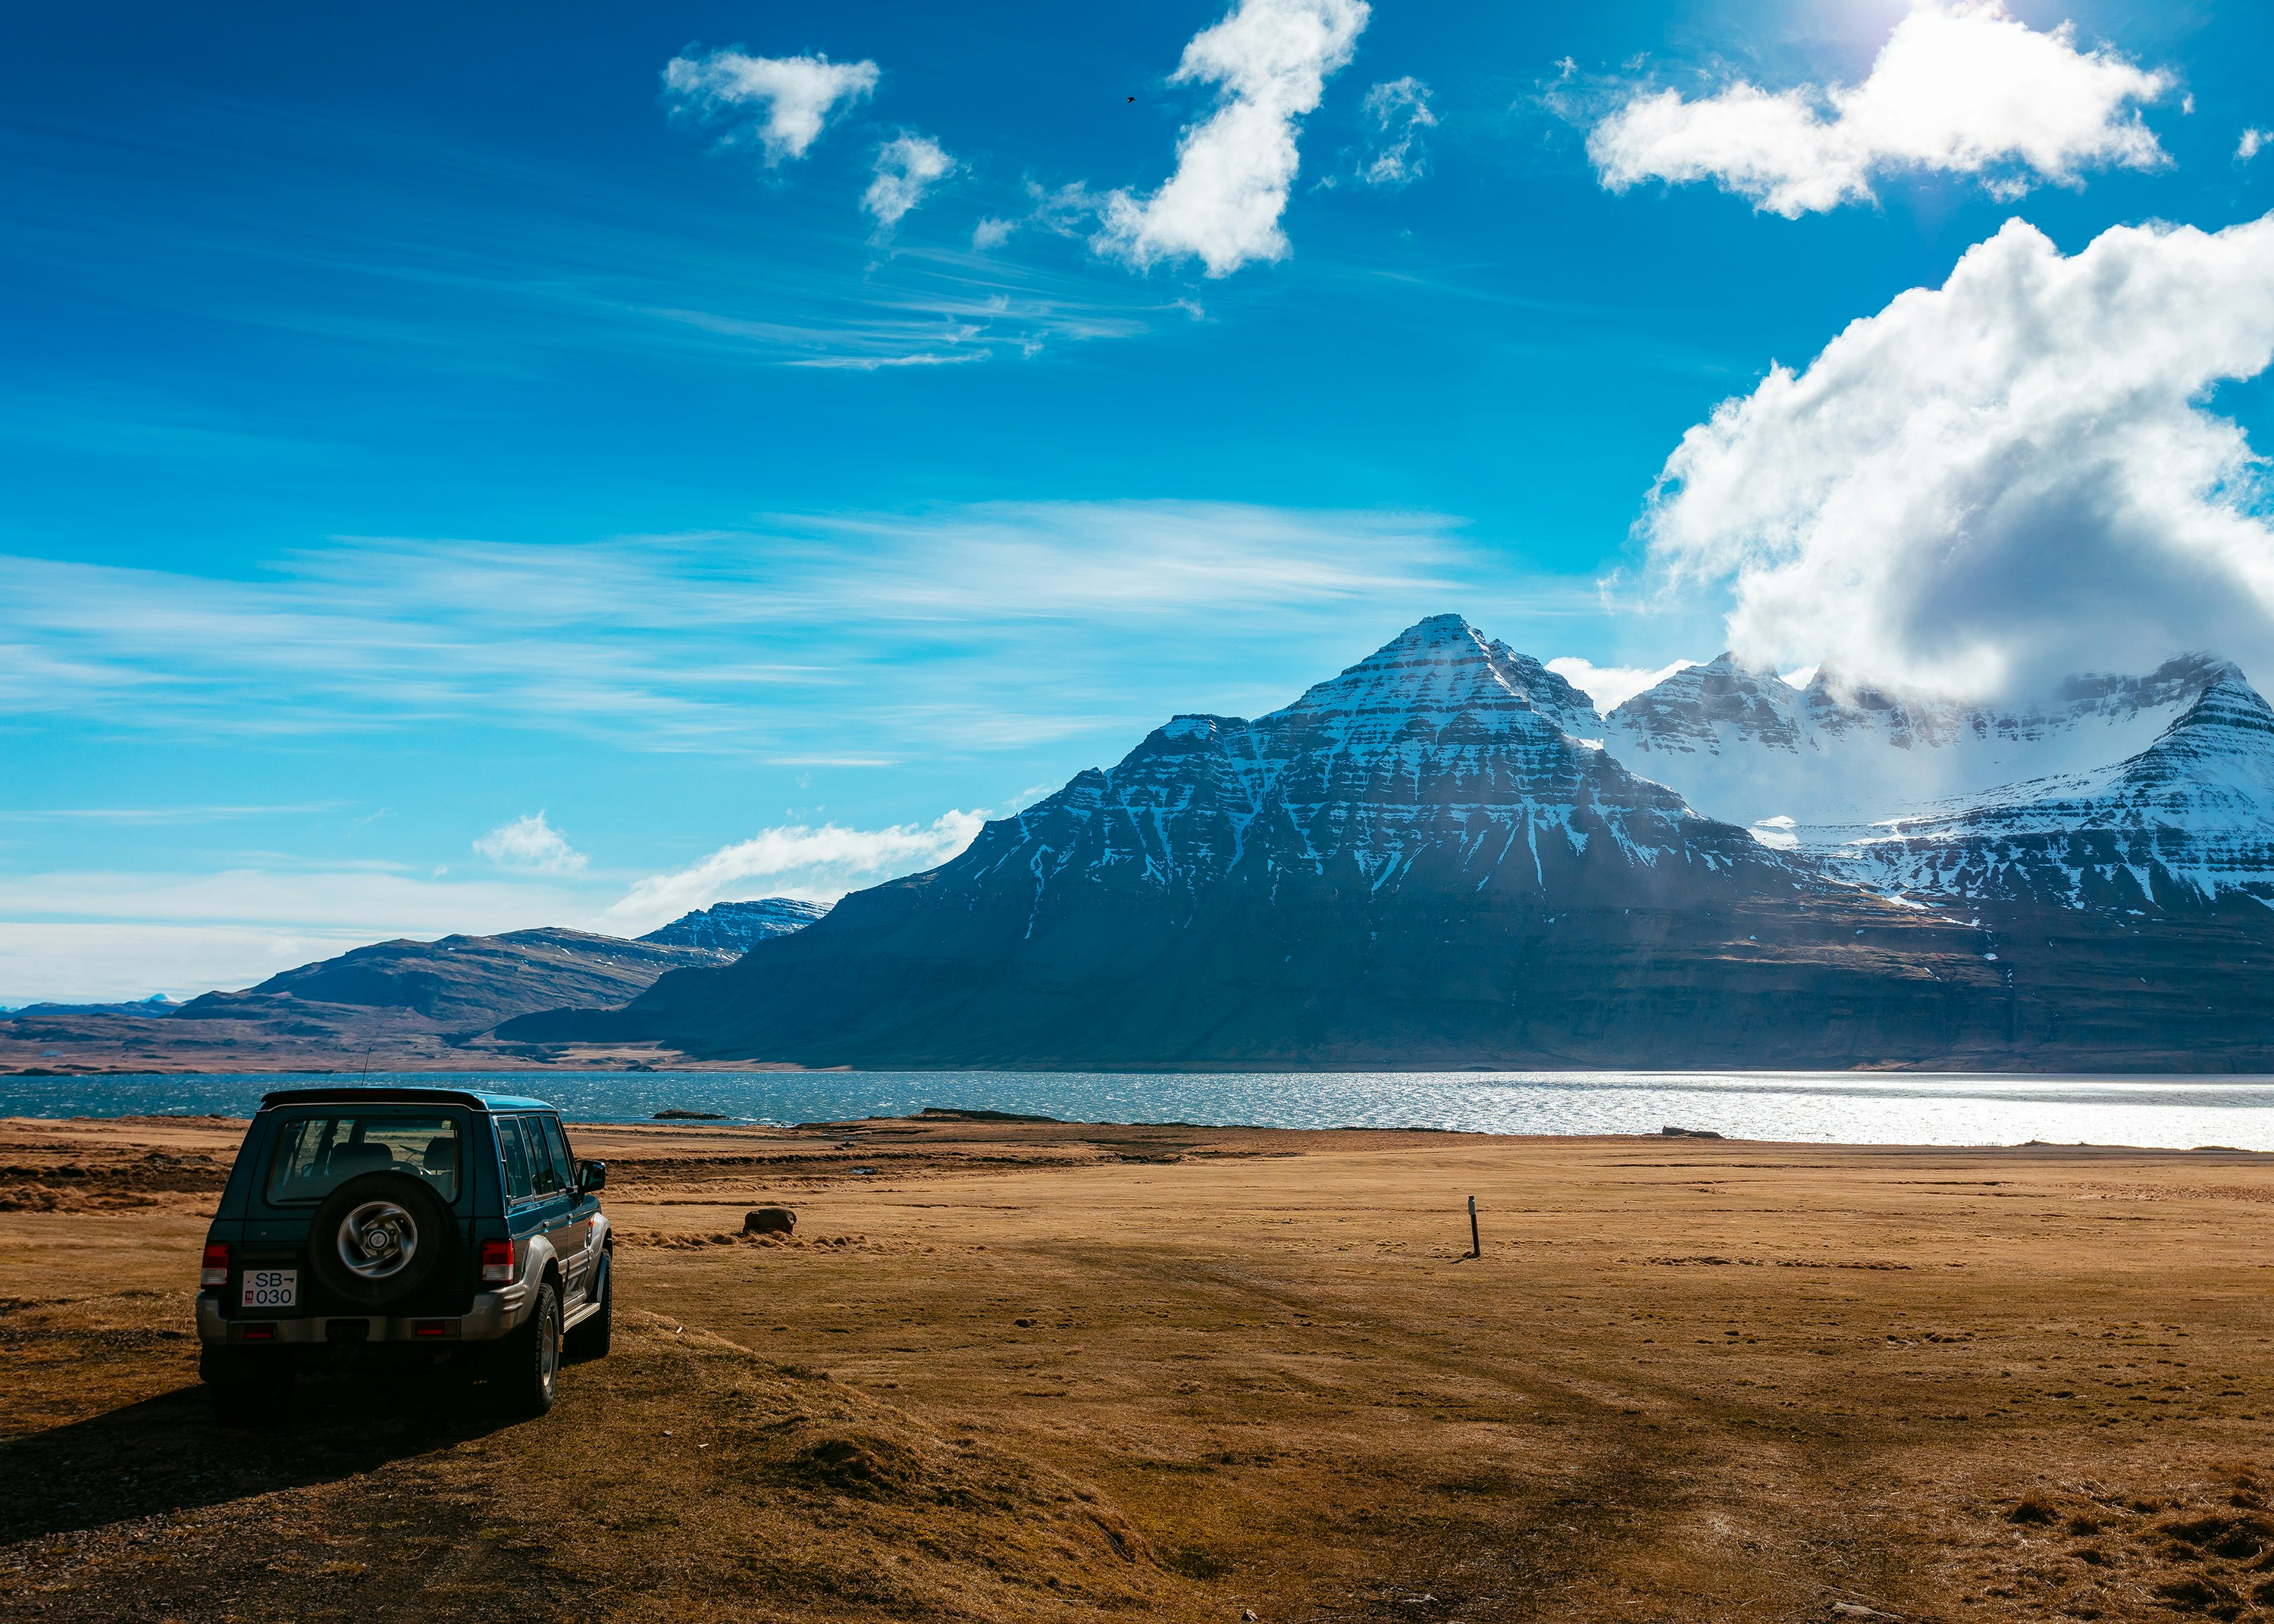 I don’t remember where this pic was taken, there’s so much place like this in Iceland… a big 4x4 car and a beautiful landscape…